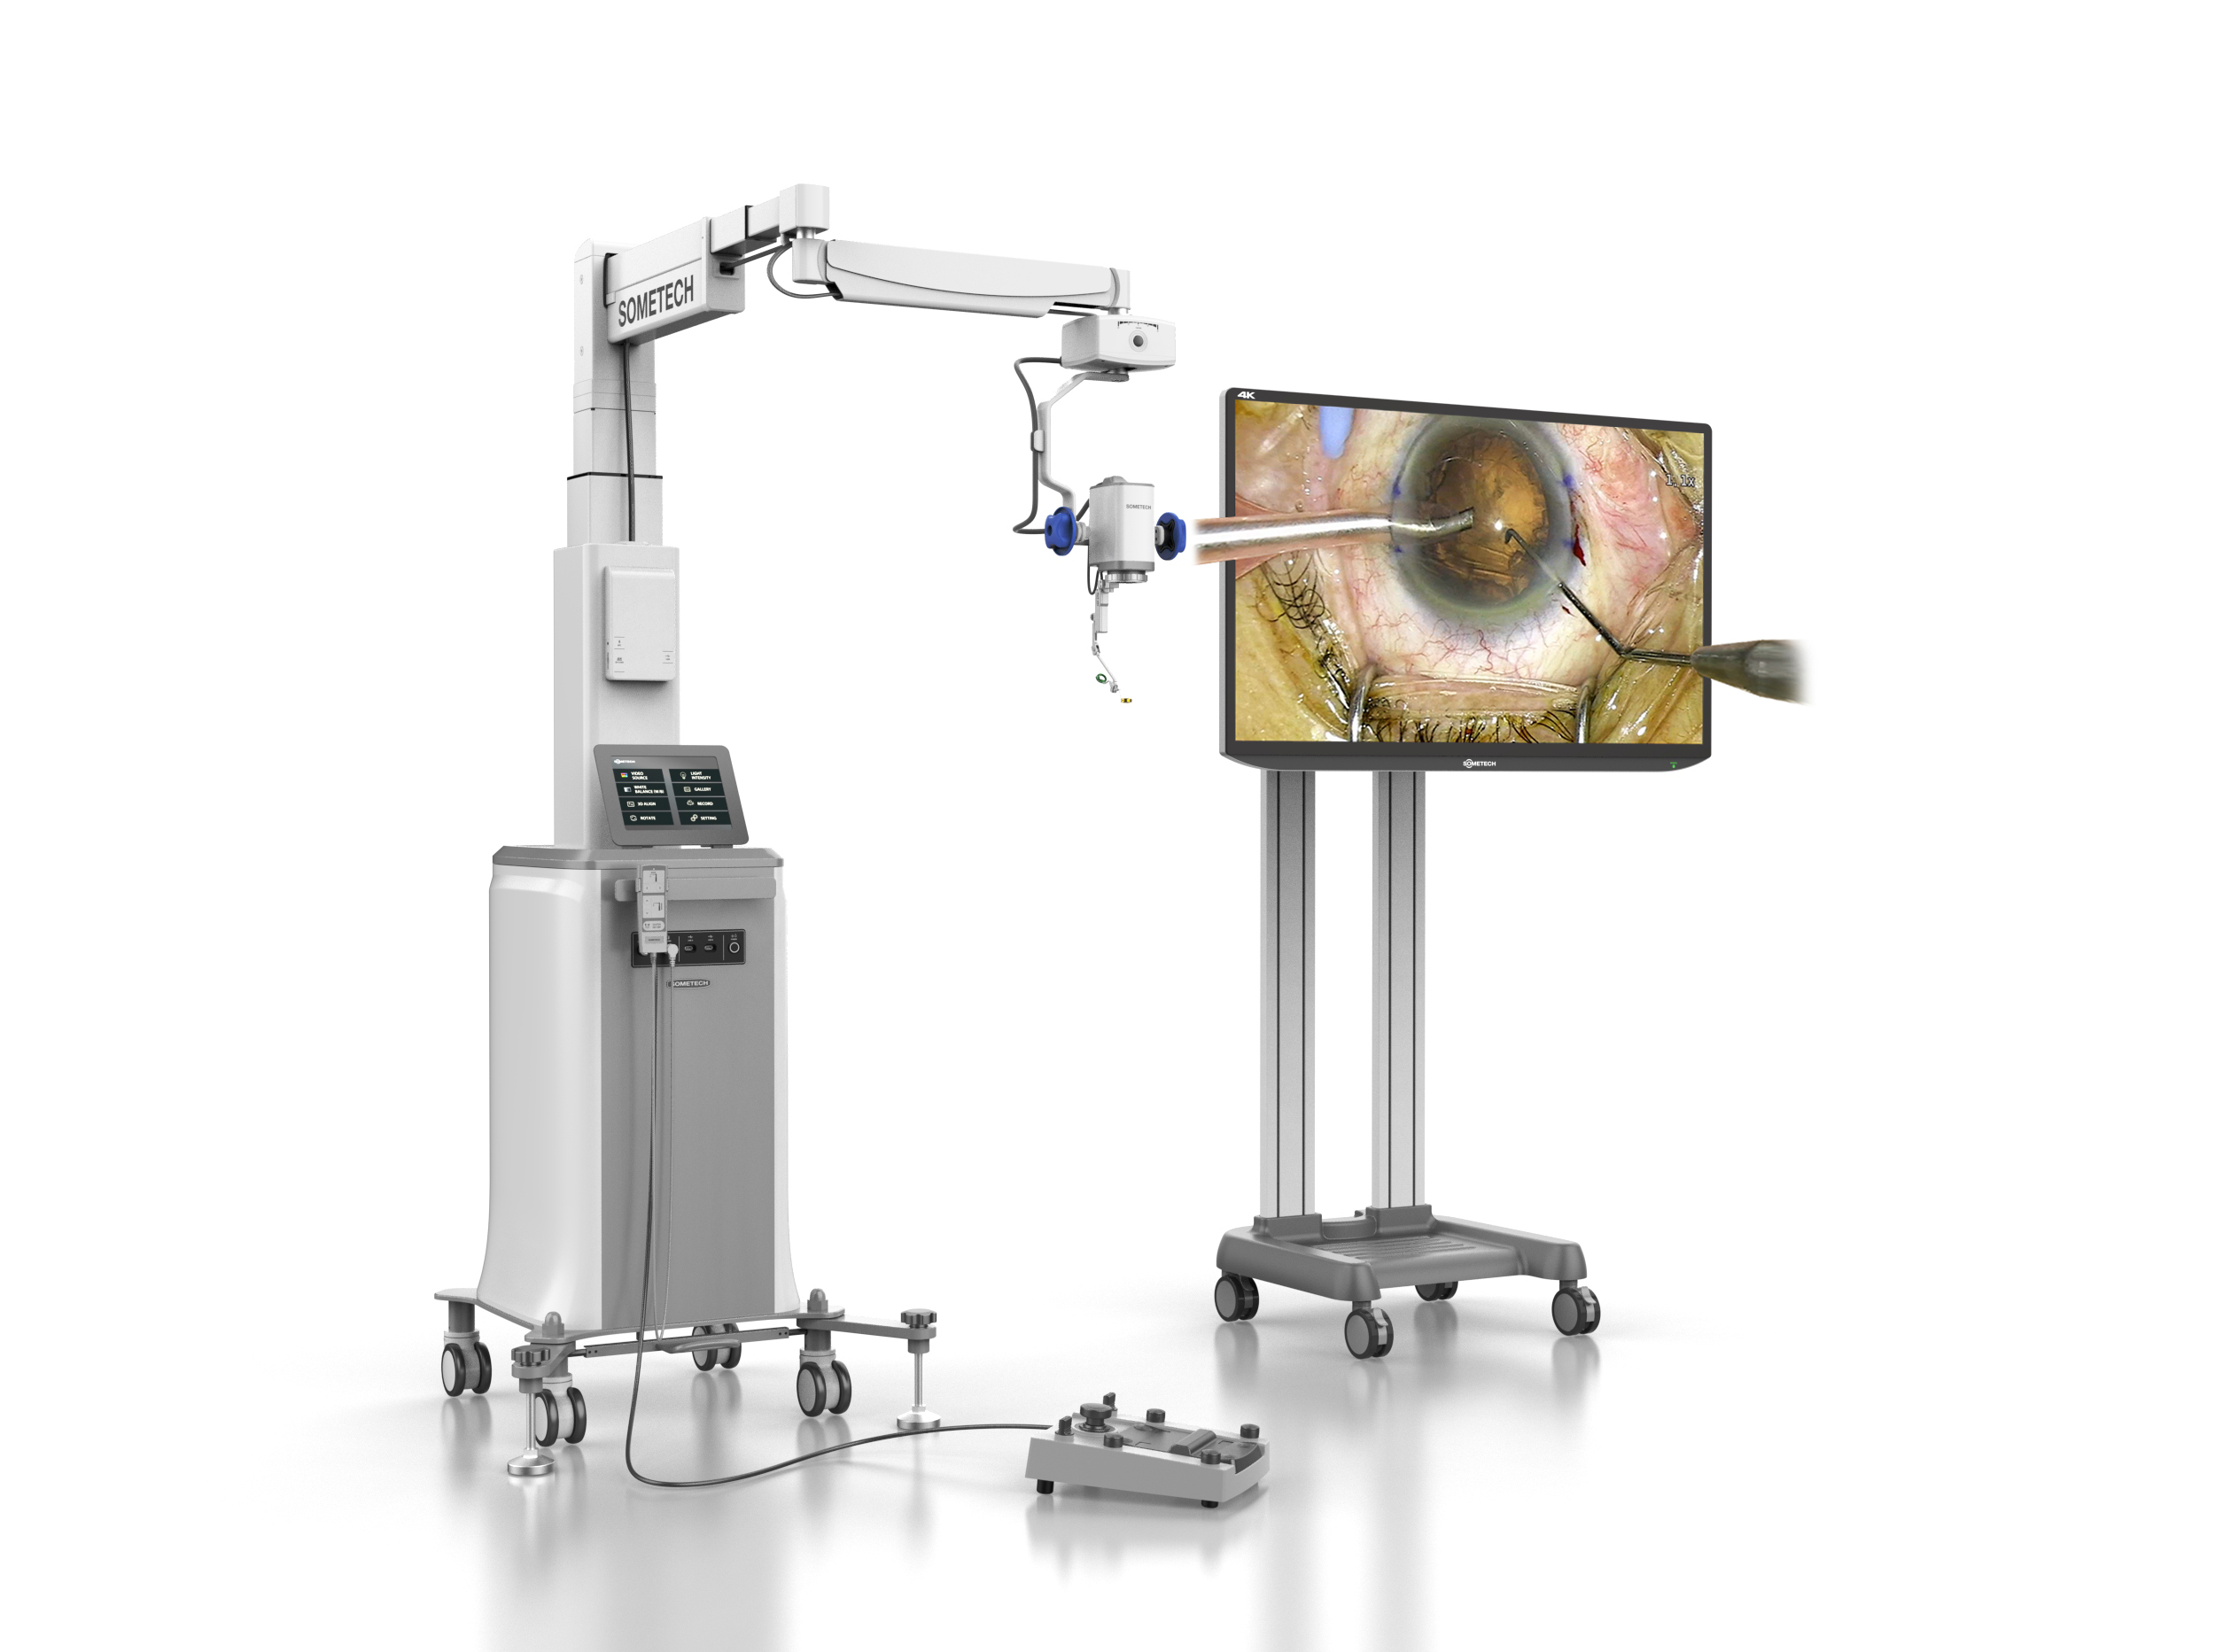 3D Video Digital Surgical Microscopy system _VOMS_400_